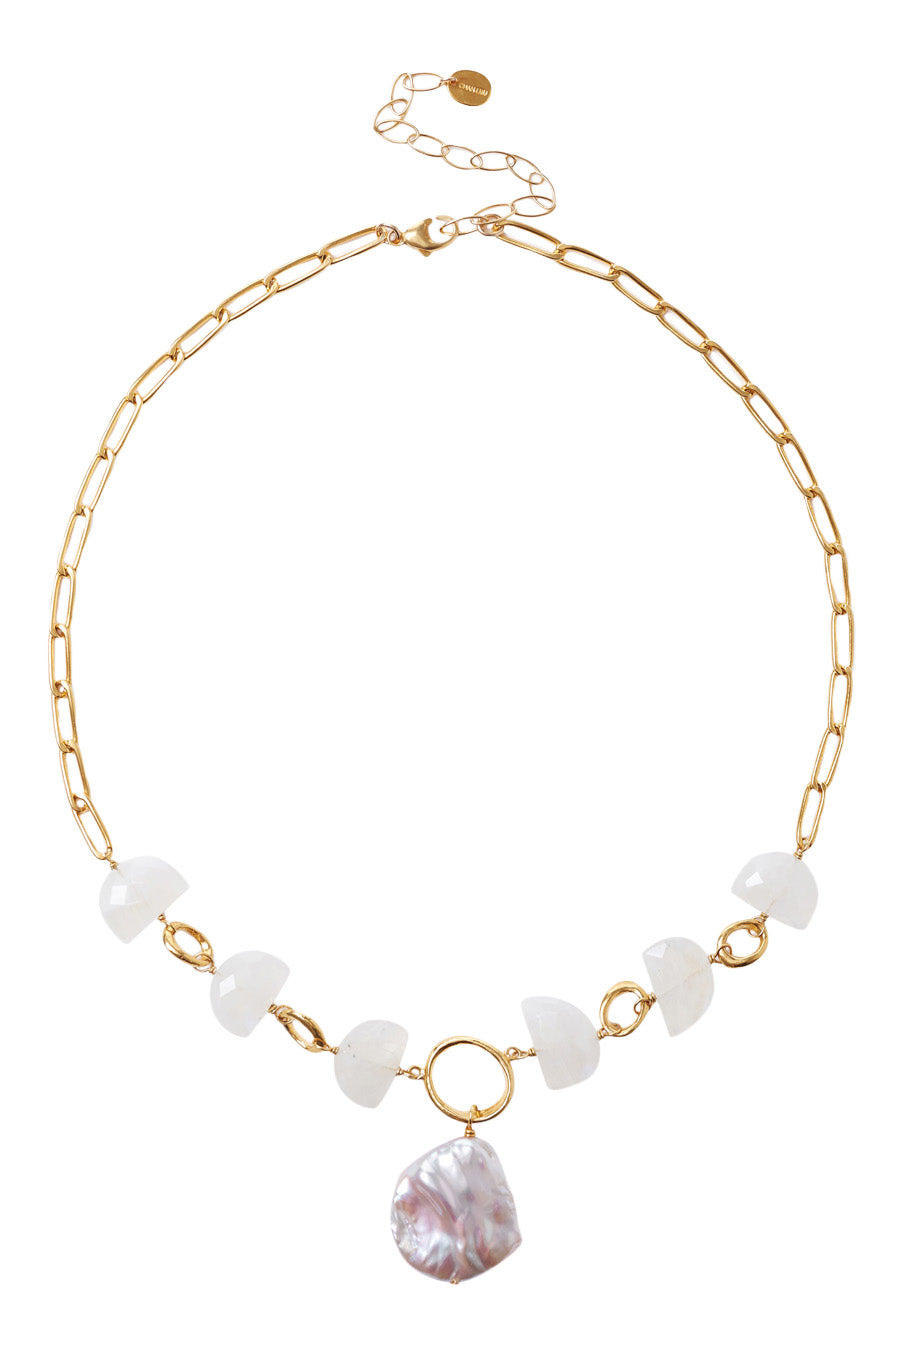 Chan Luu Pearl Luna Necklace in Yellow Gold